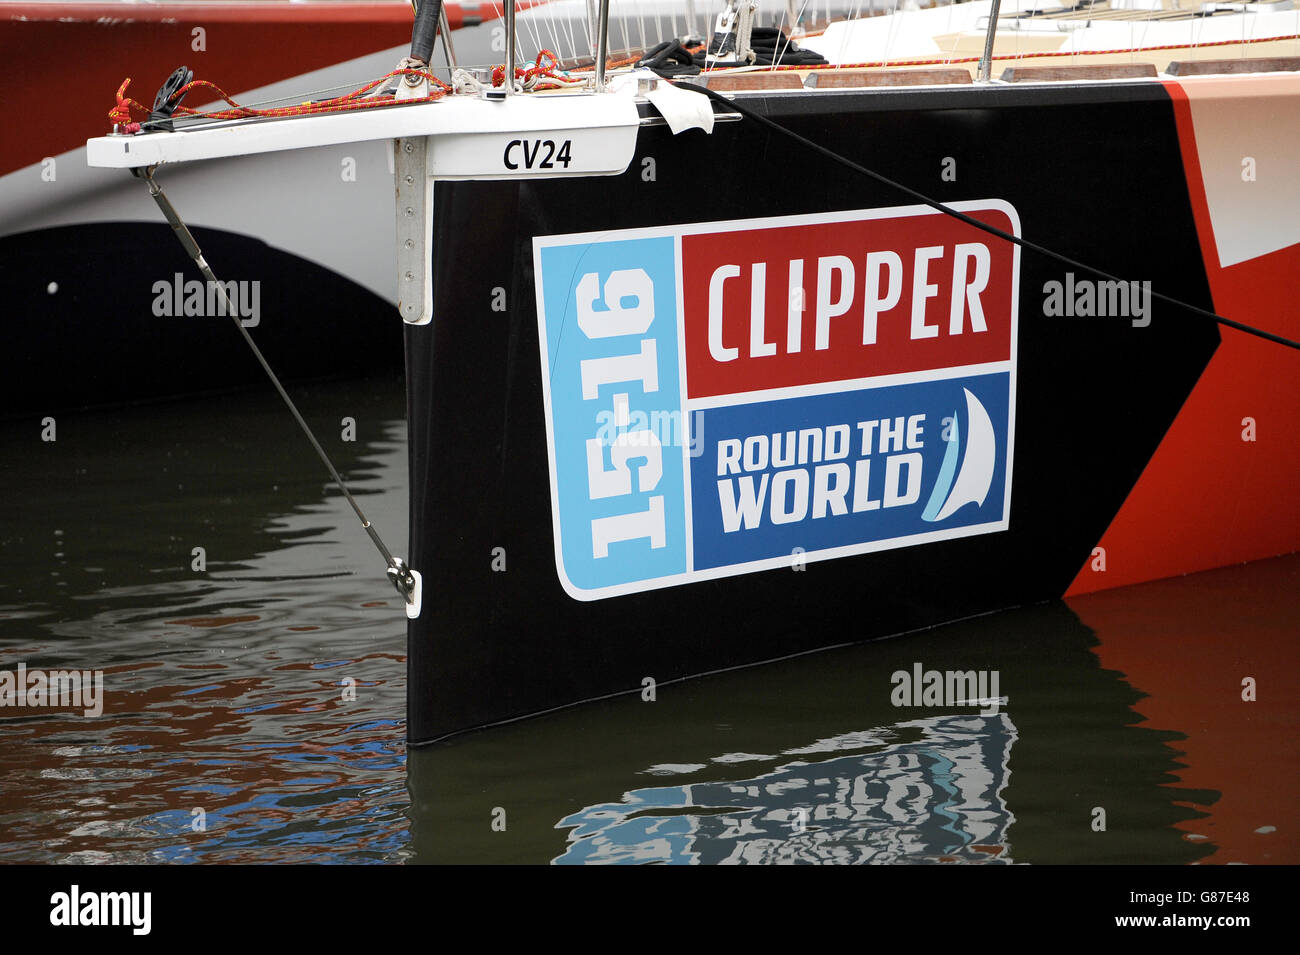 Sailing - Clipper Round the World Yacht Race Launch - Day Five - St Katharine's Docks. Clipper Round the World 15-16 signage on a vessels moored at St Katharine's Docks Stock Photo